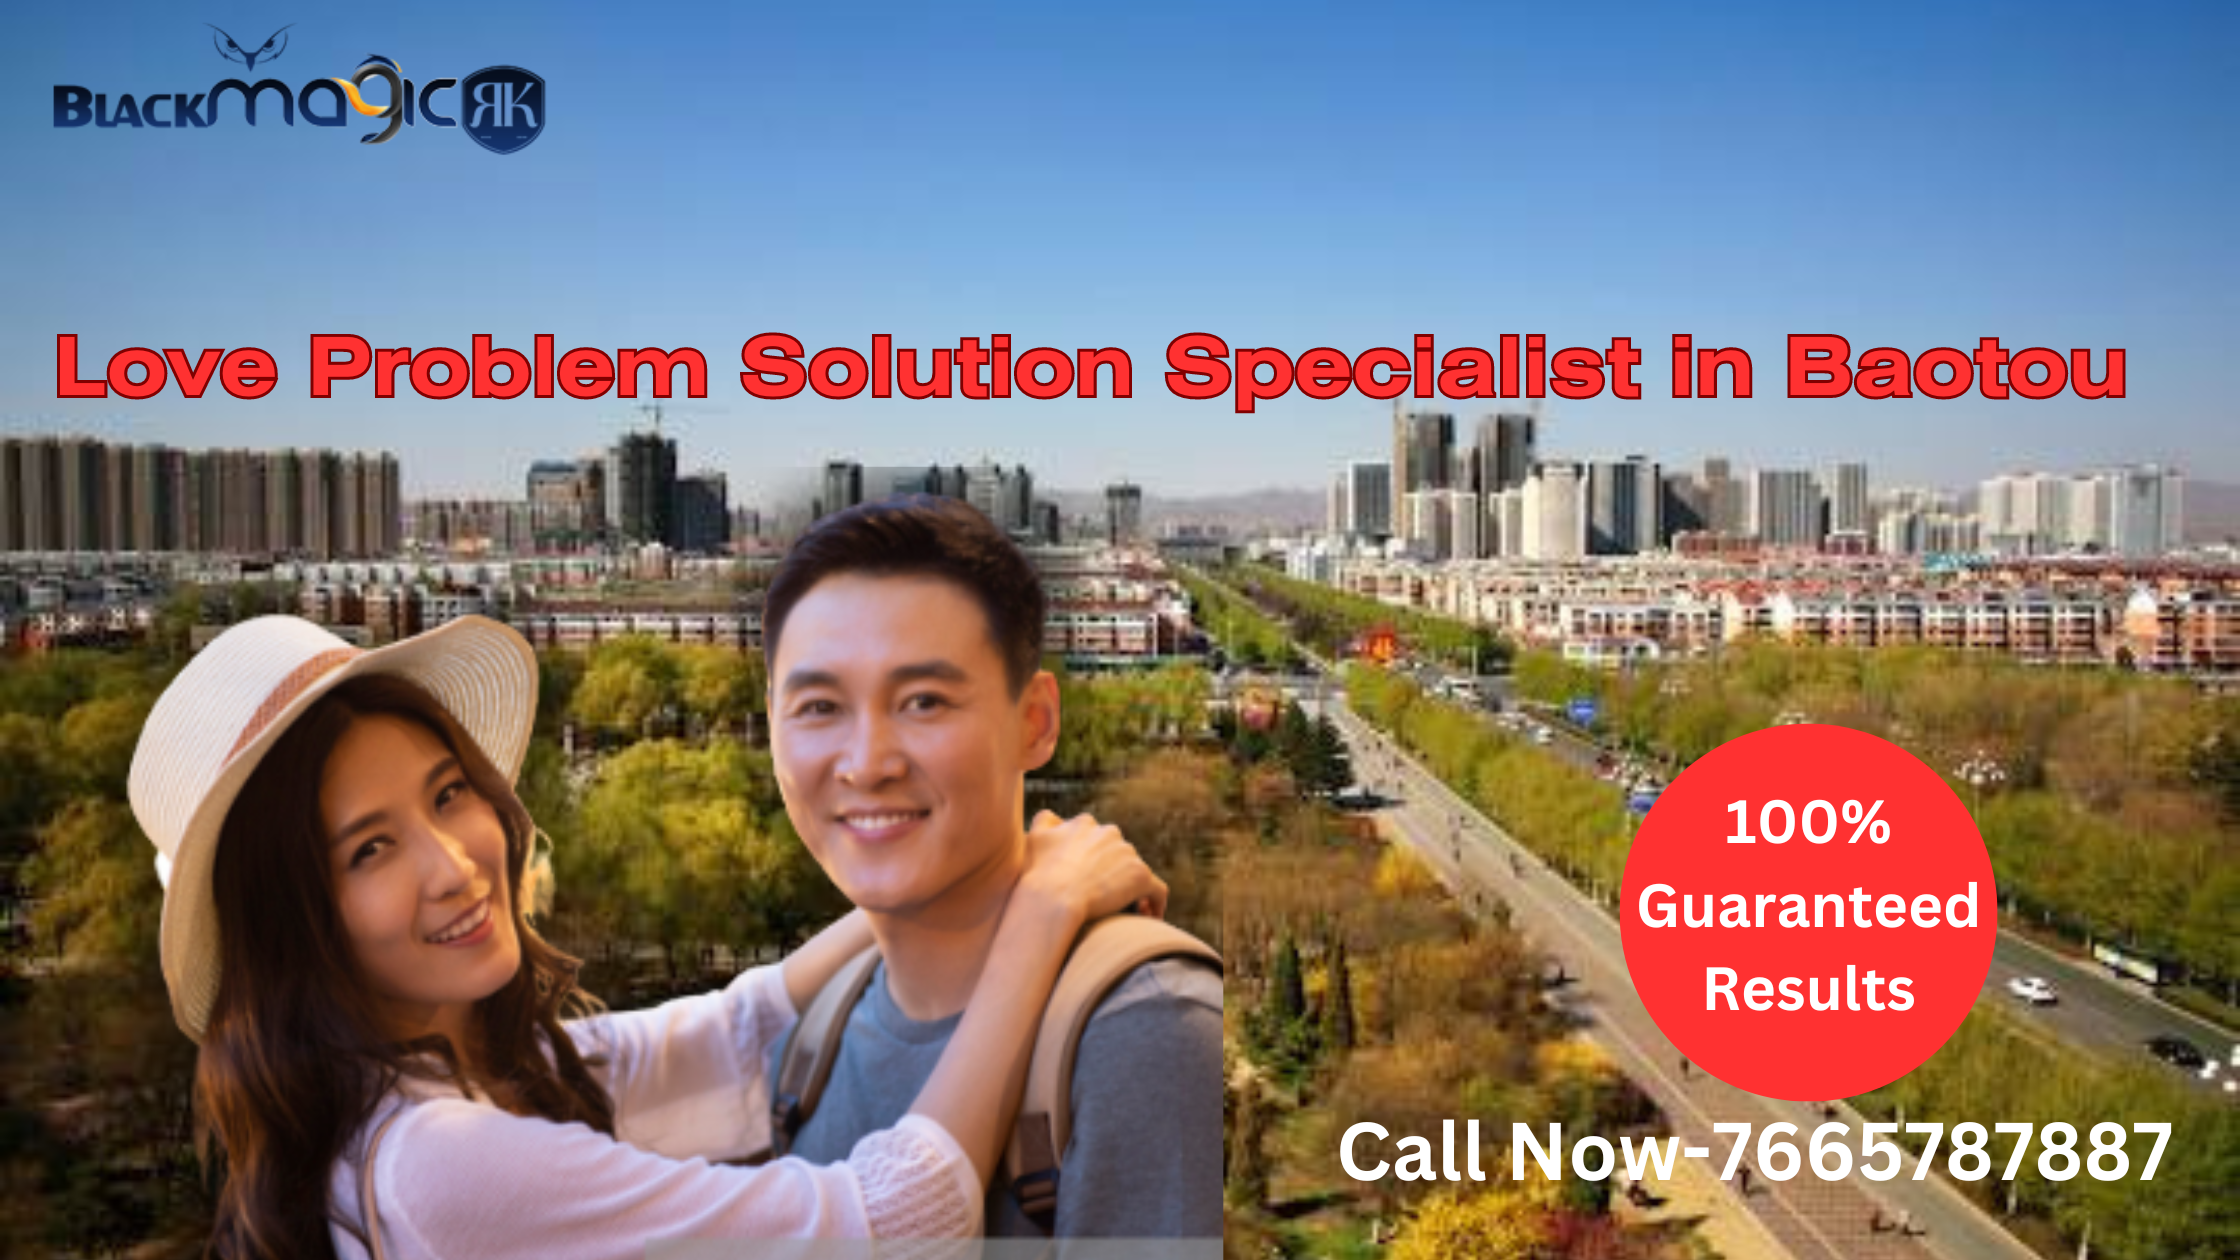 Love Problem Solution Specialist in Baotou